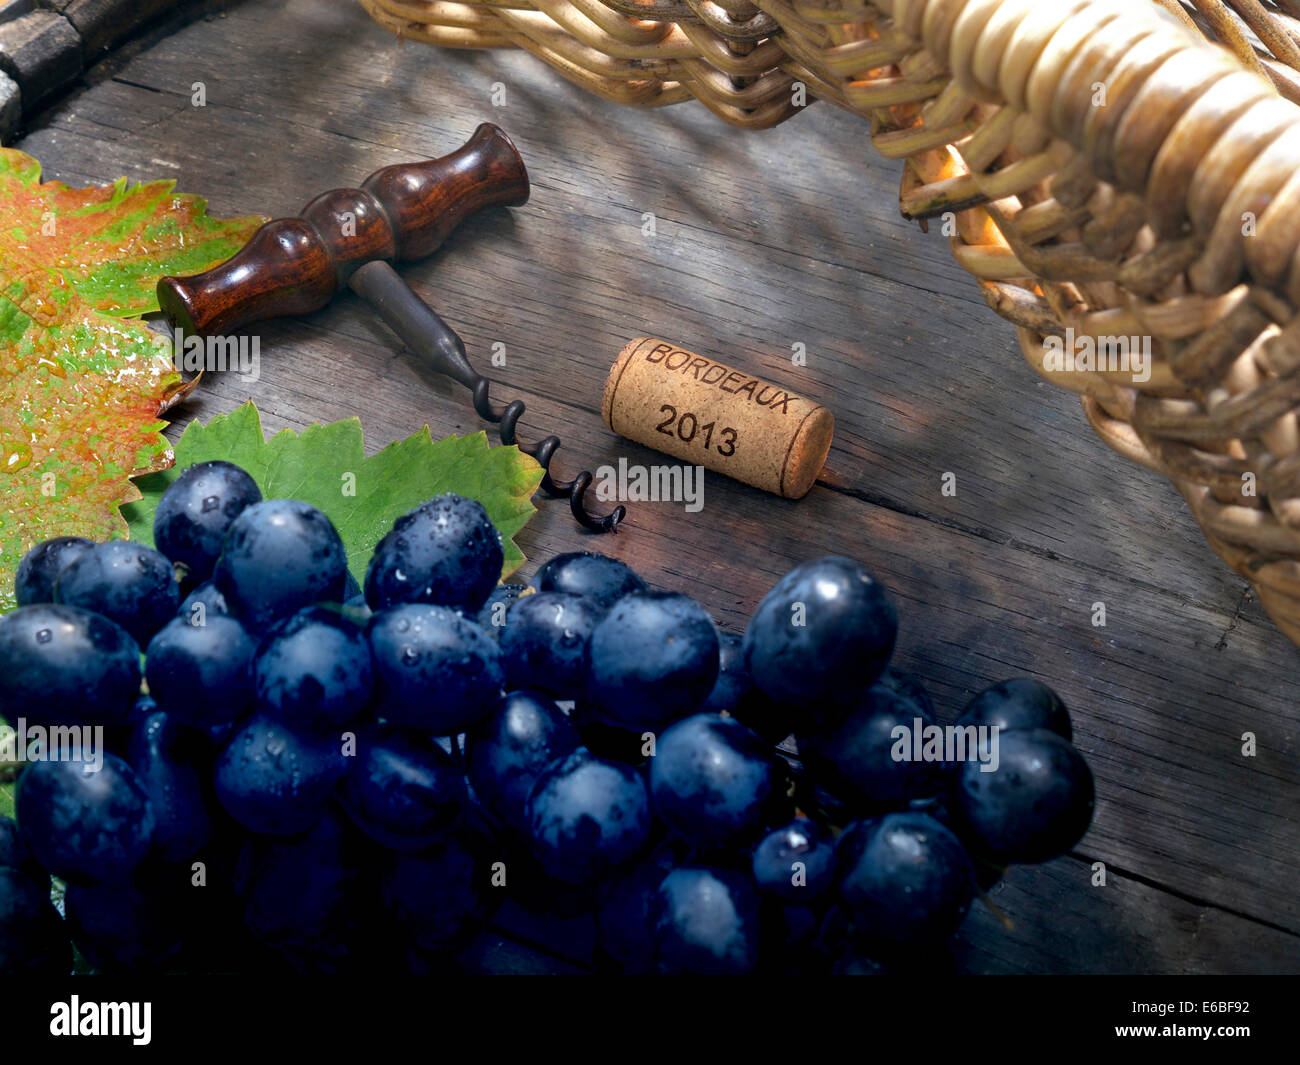 Merlot grapes Wine cellar situation with grape pickers basket dark grapes corkscrew and Bordeaux 2013 cork on wine barrel Stock Photo